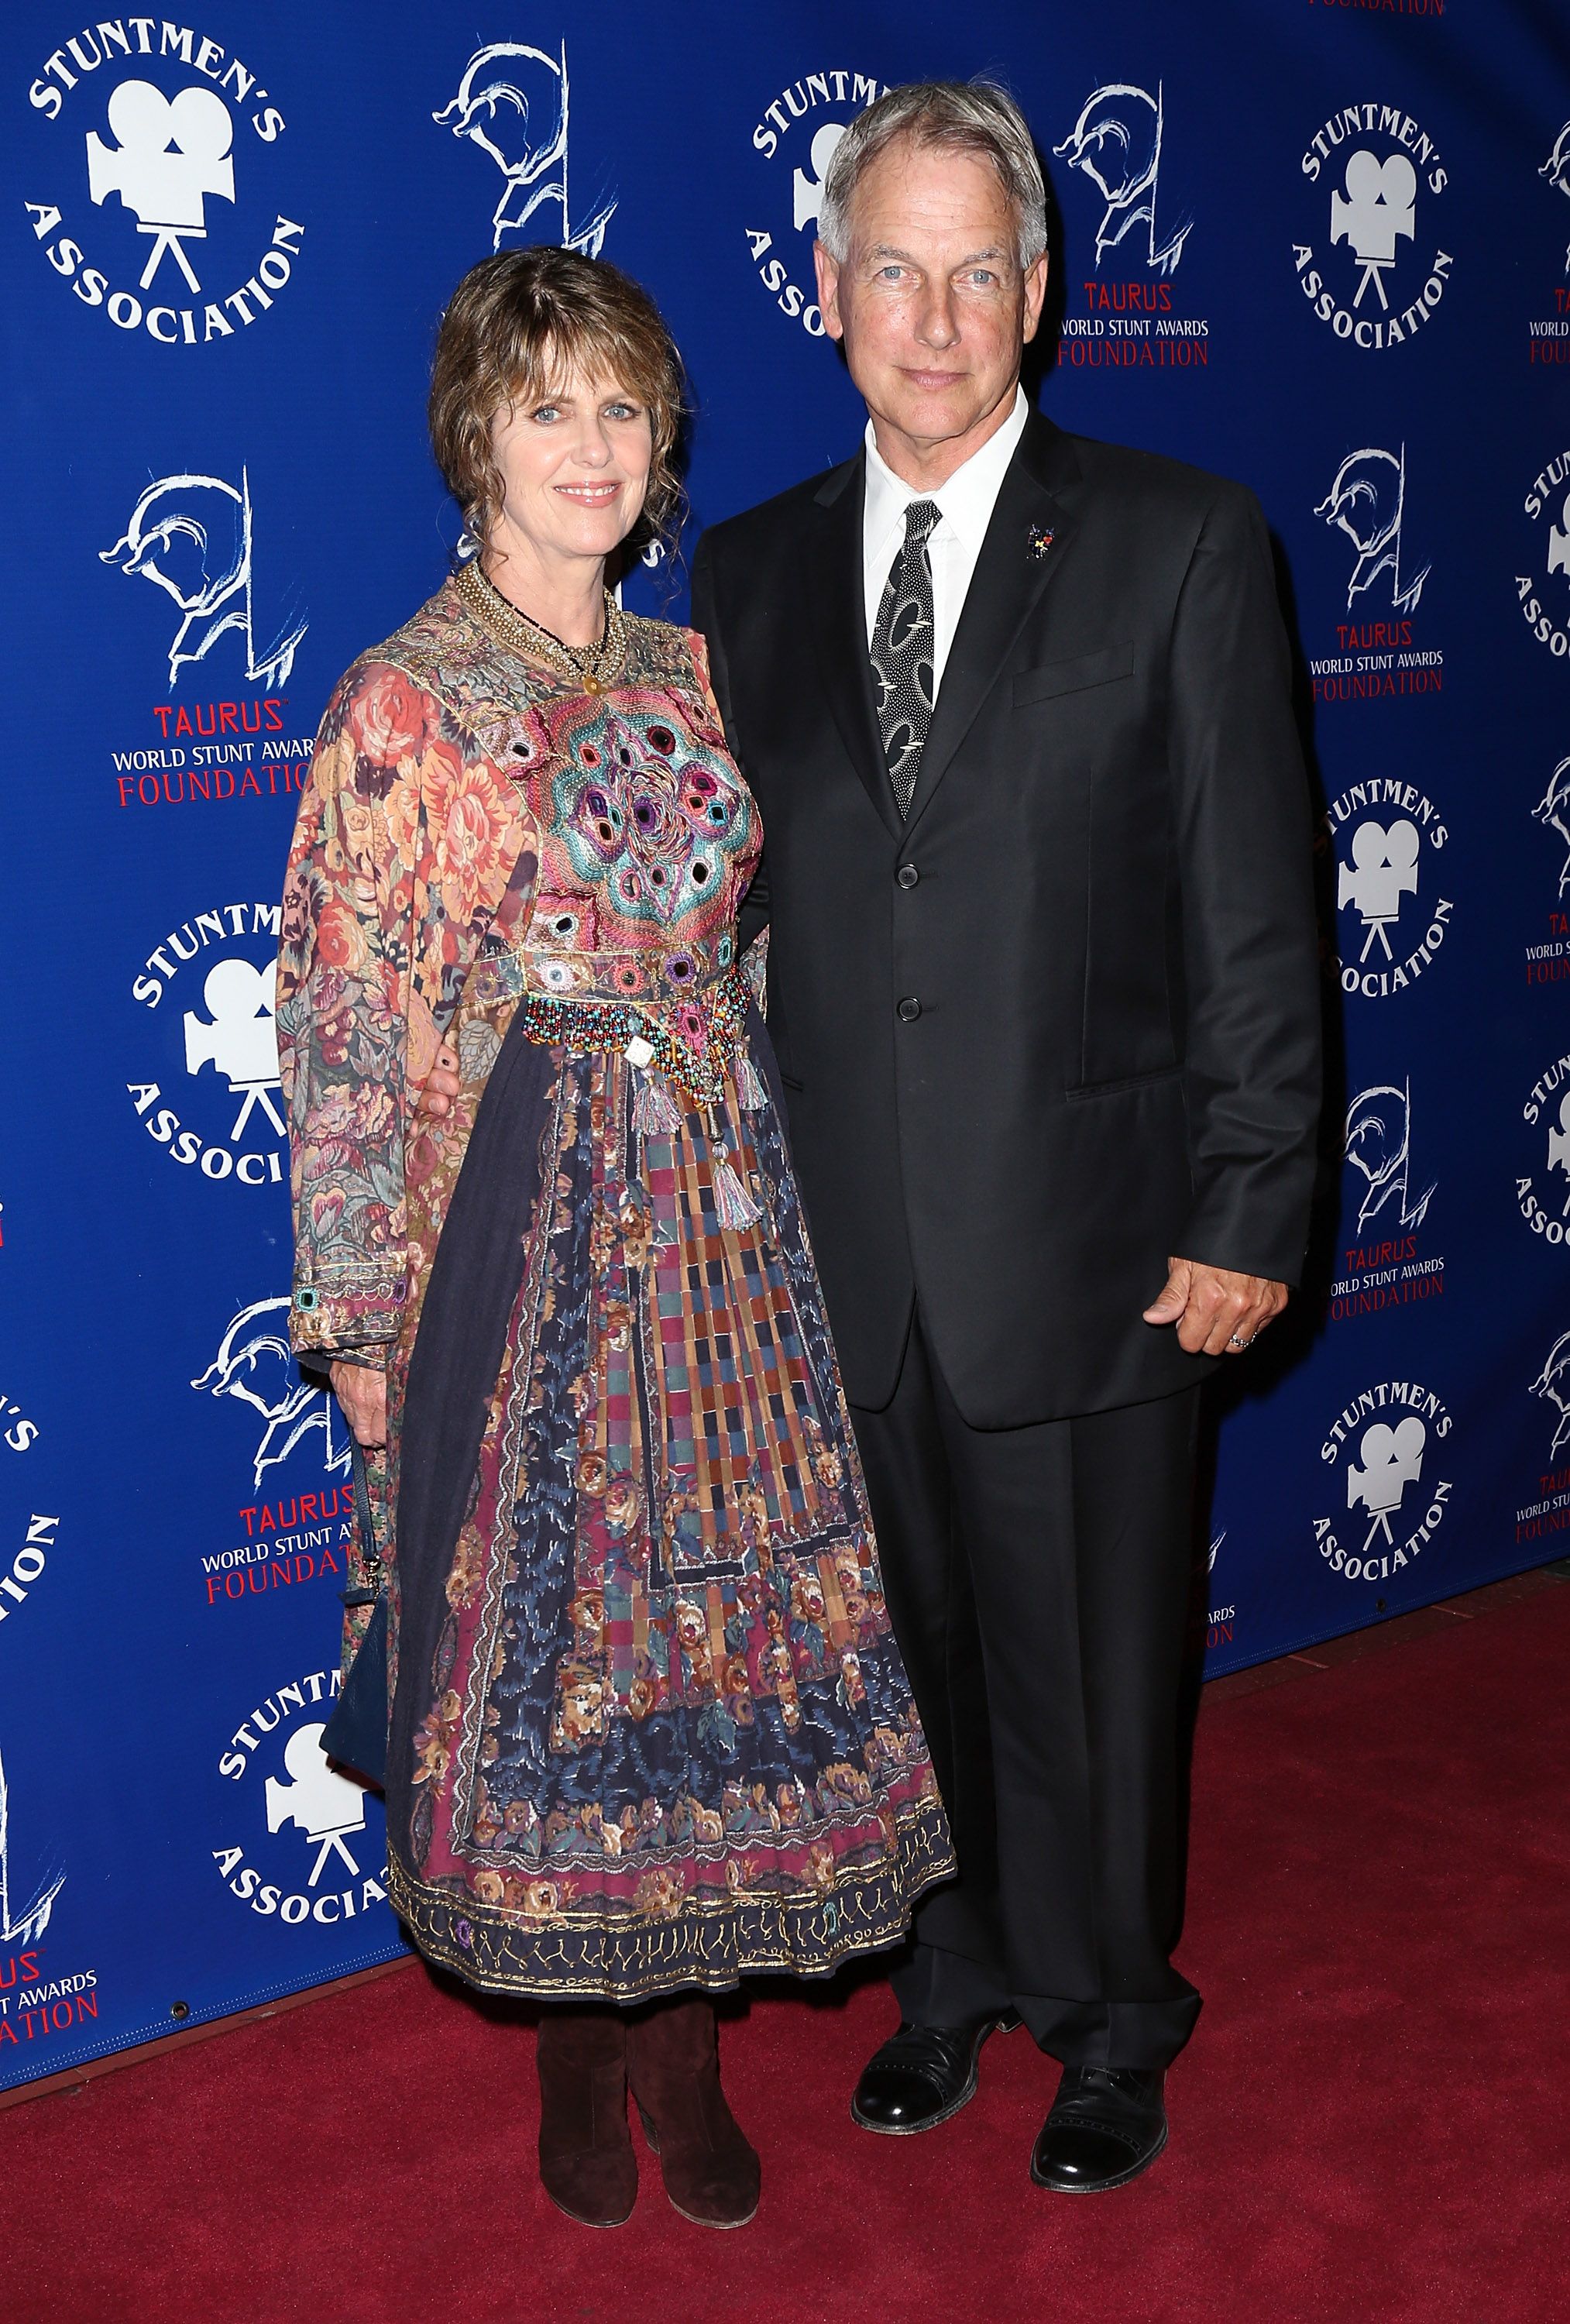 Pam Dawber and Mark Harmon at the Stuntmen's Association of Motion Pictures 52nd Annual Dinner in 2013. | Source: Getty Images